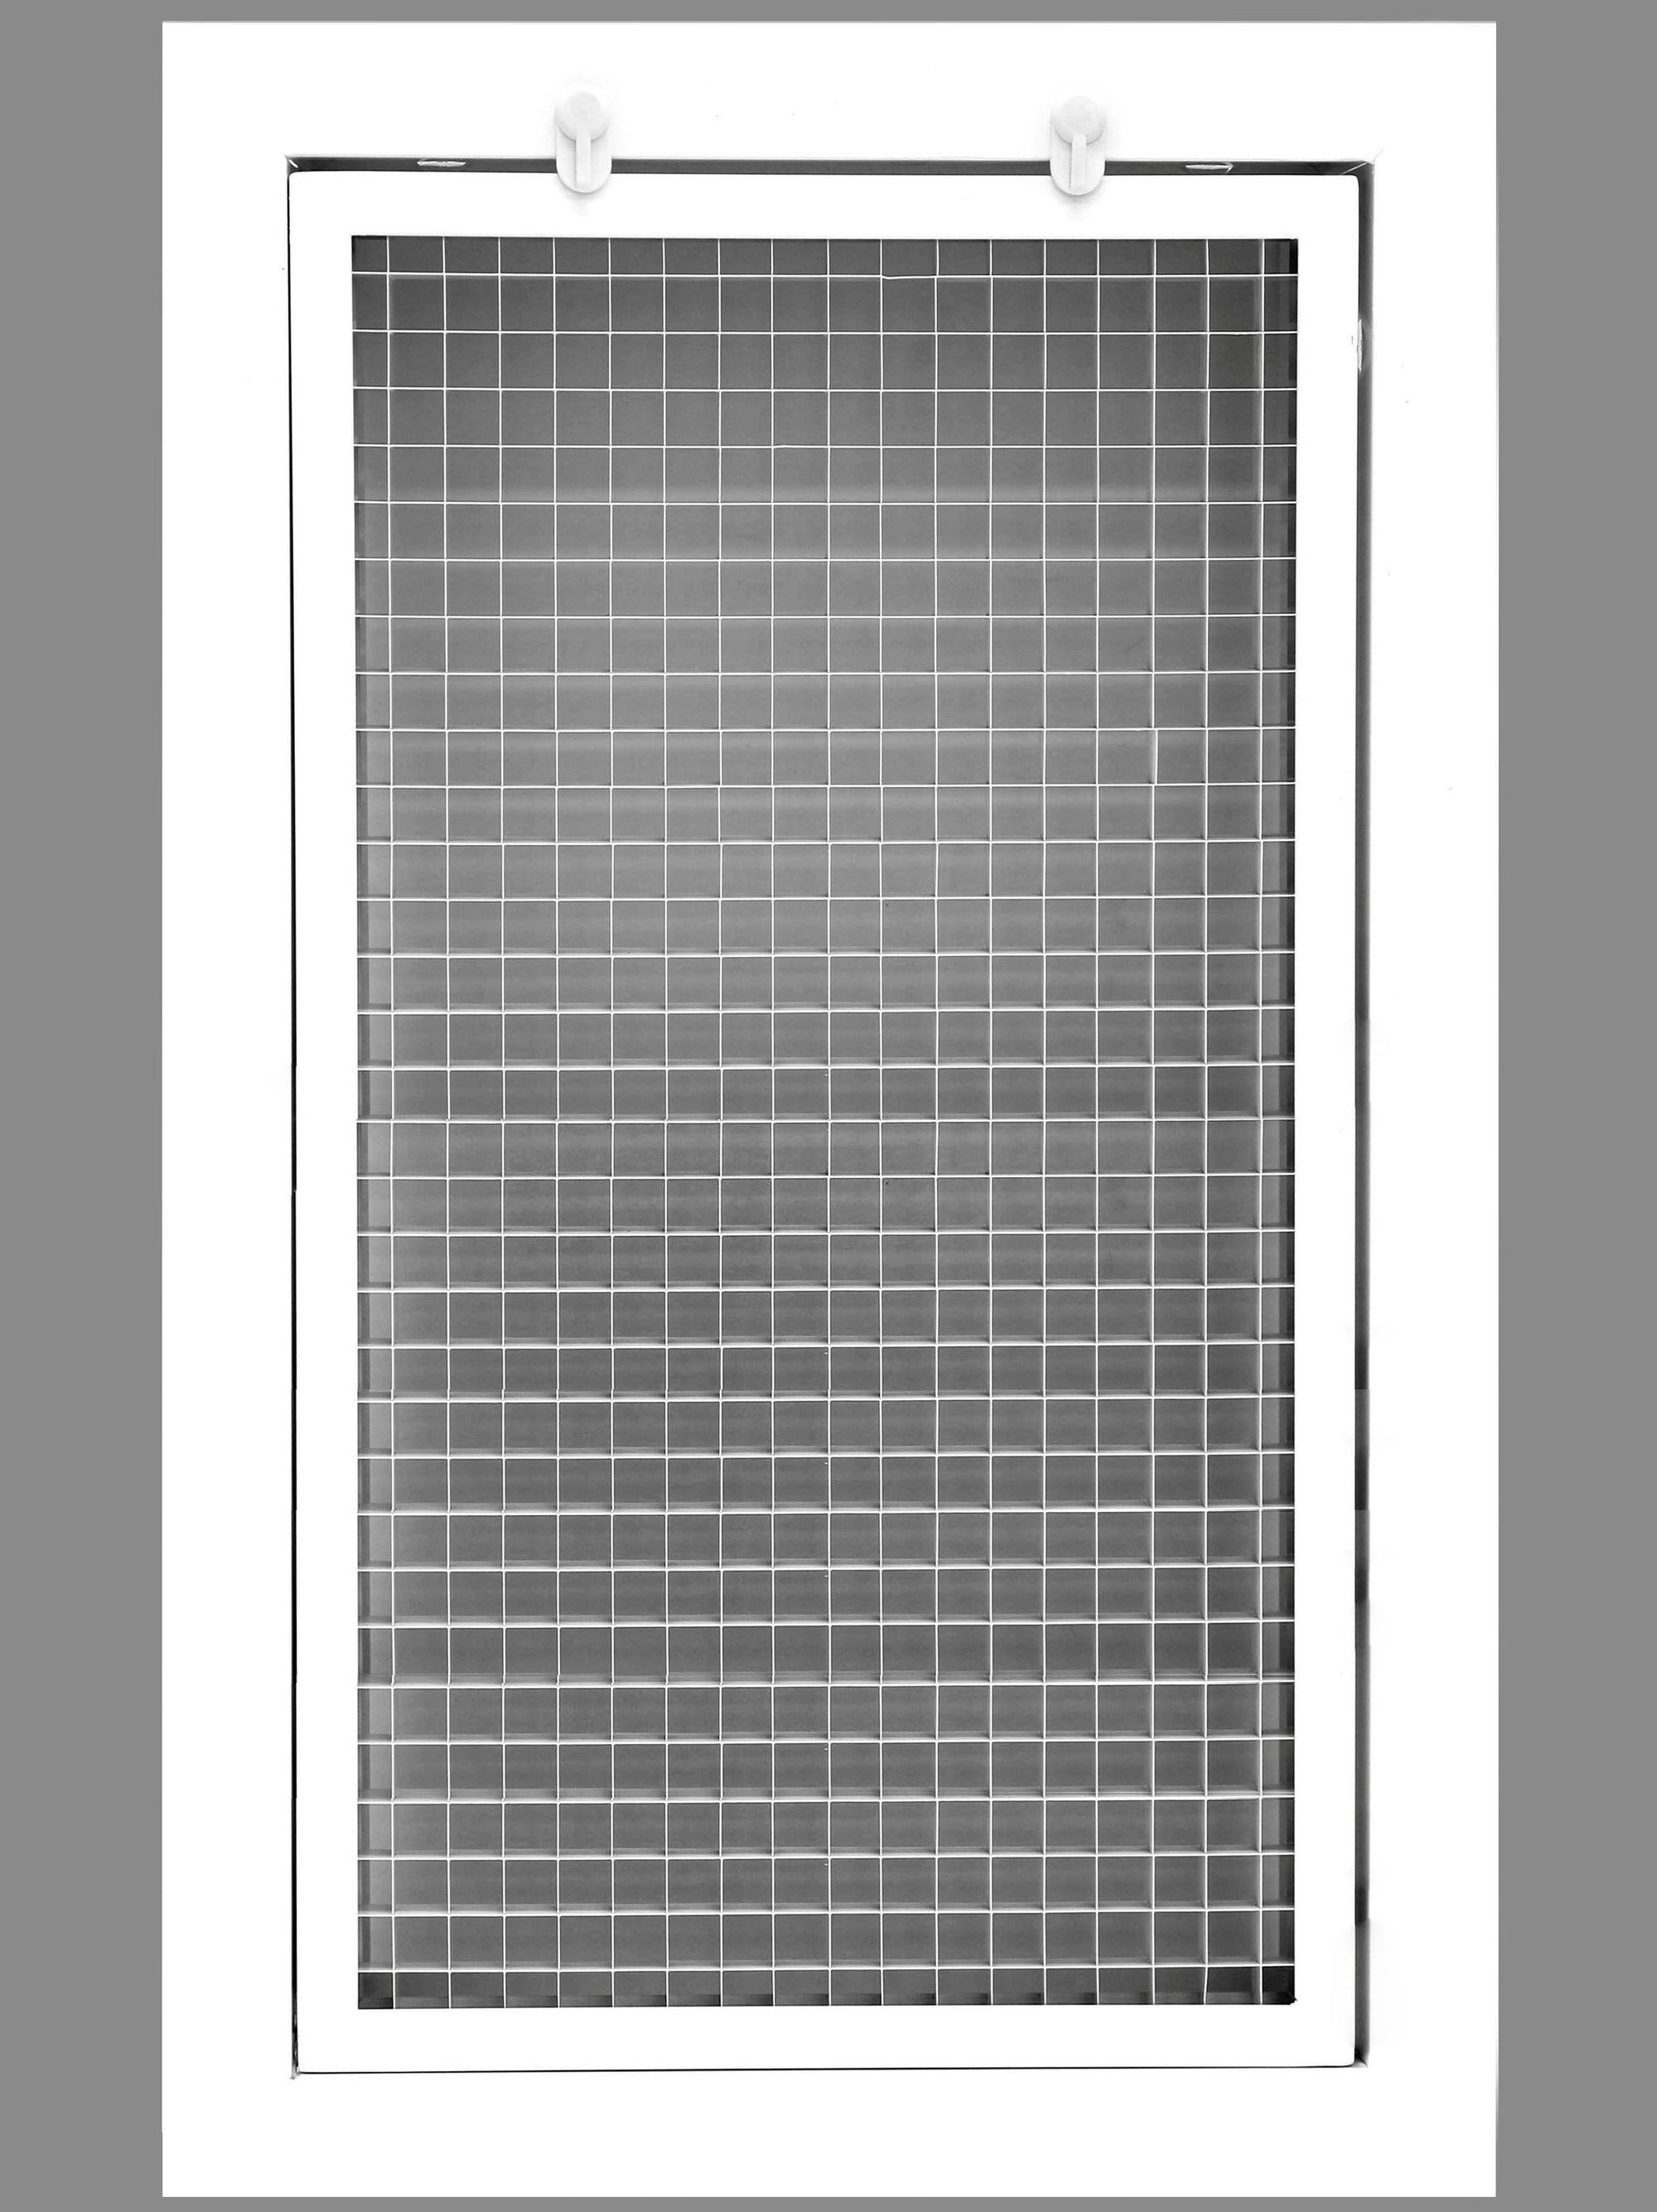 6" x 16" Cube Core Eggcrate Return Air Filter Grille for 1" Filter